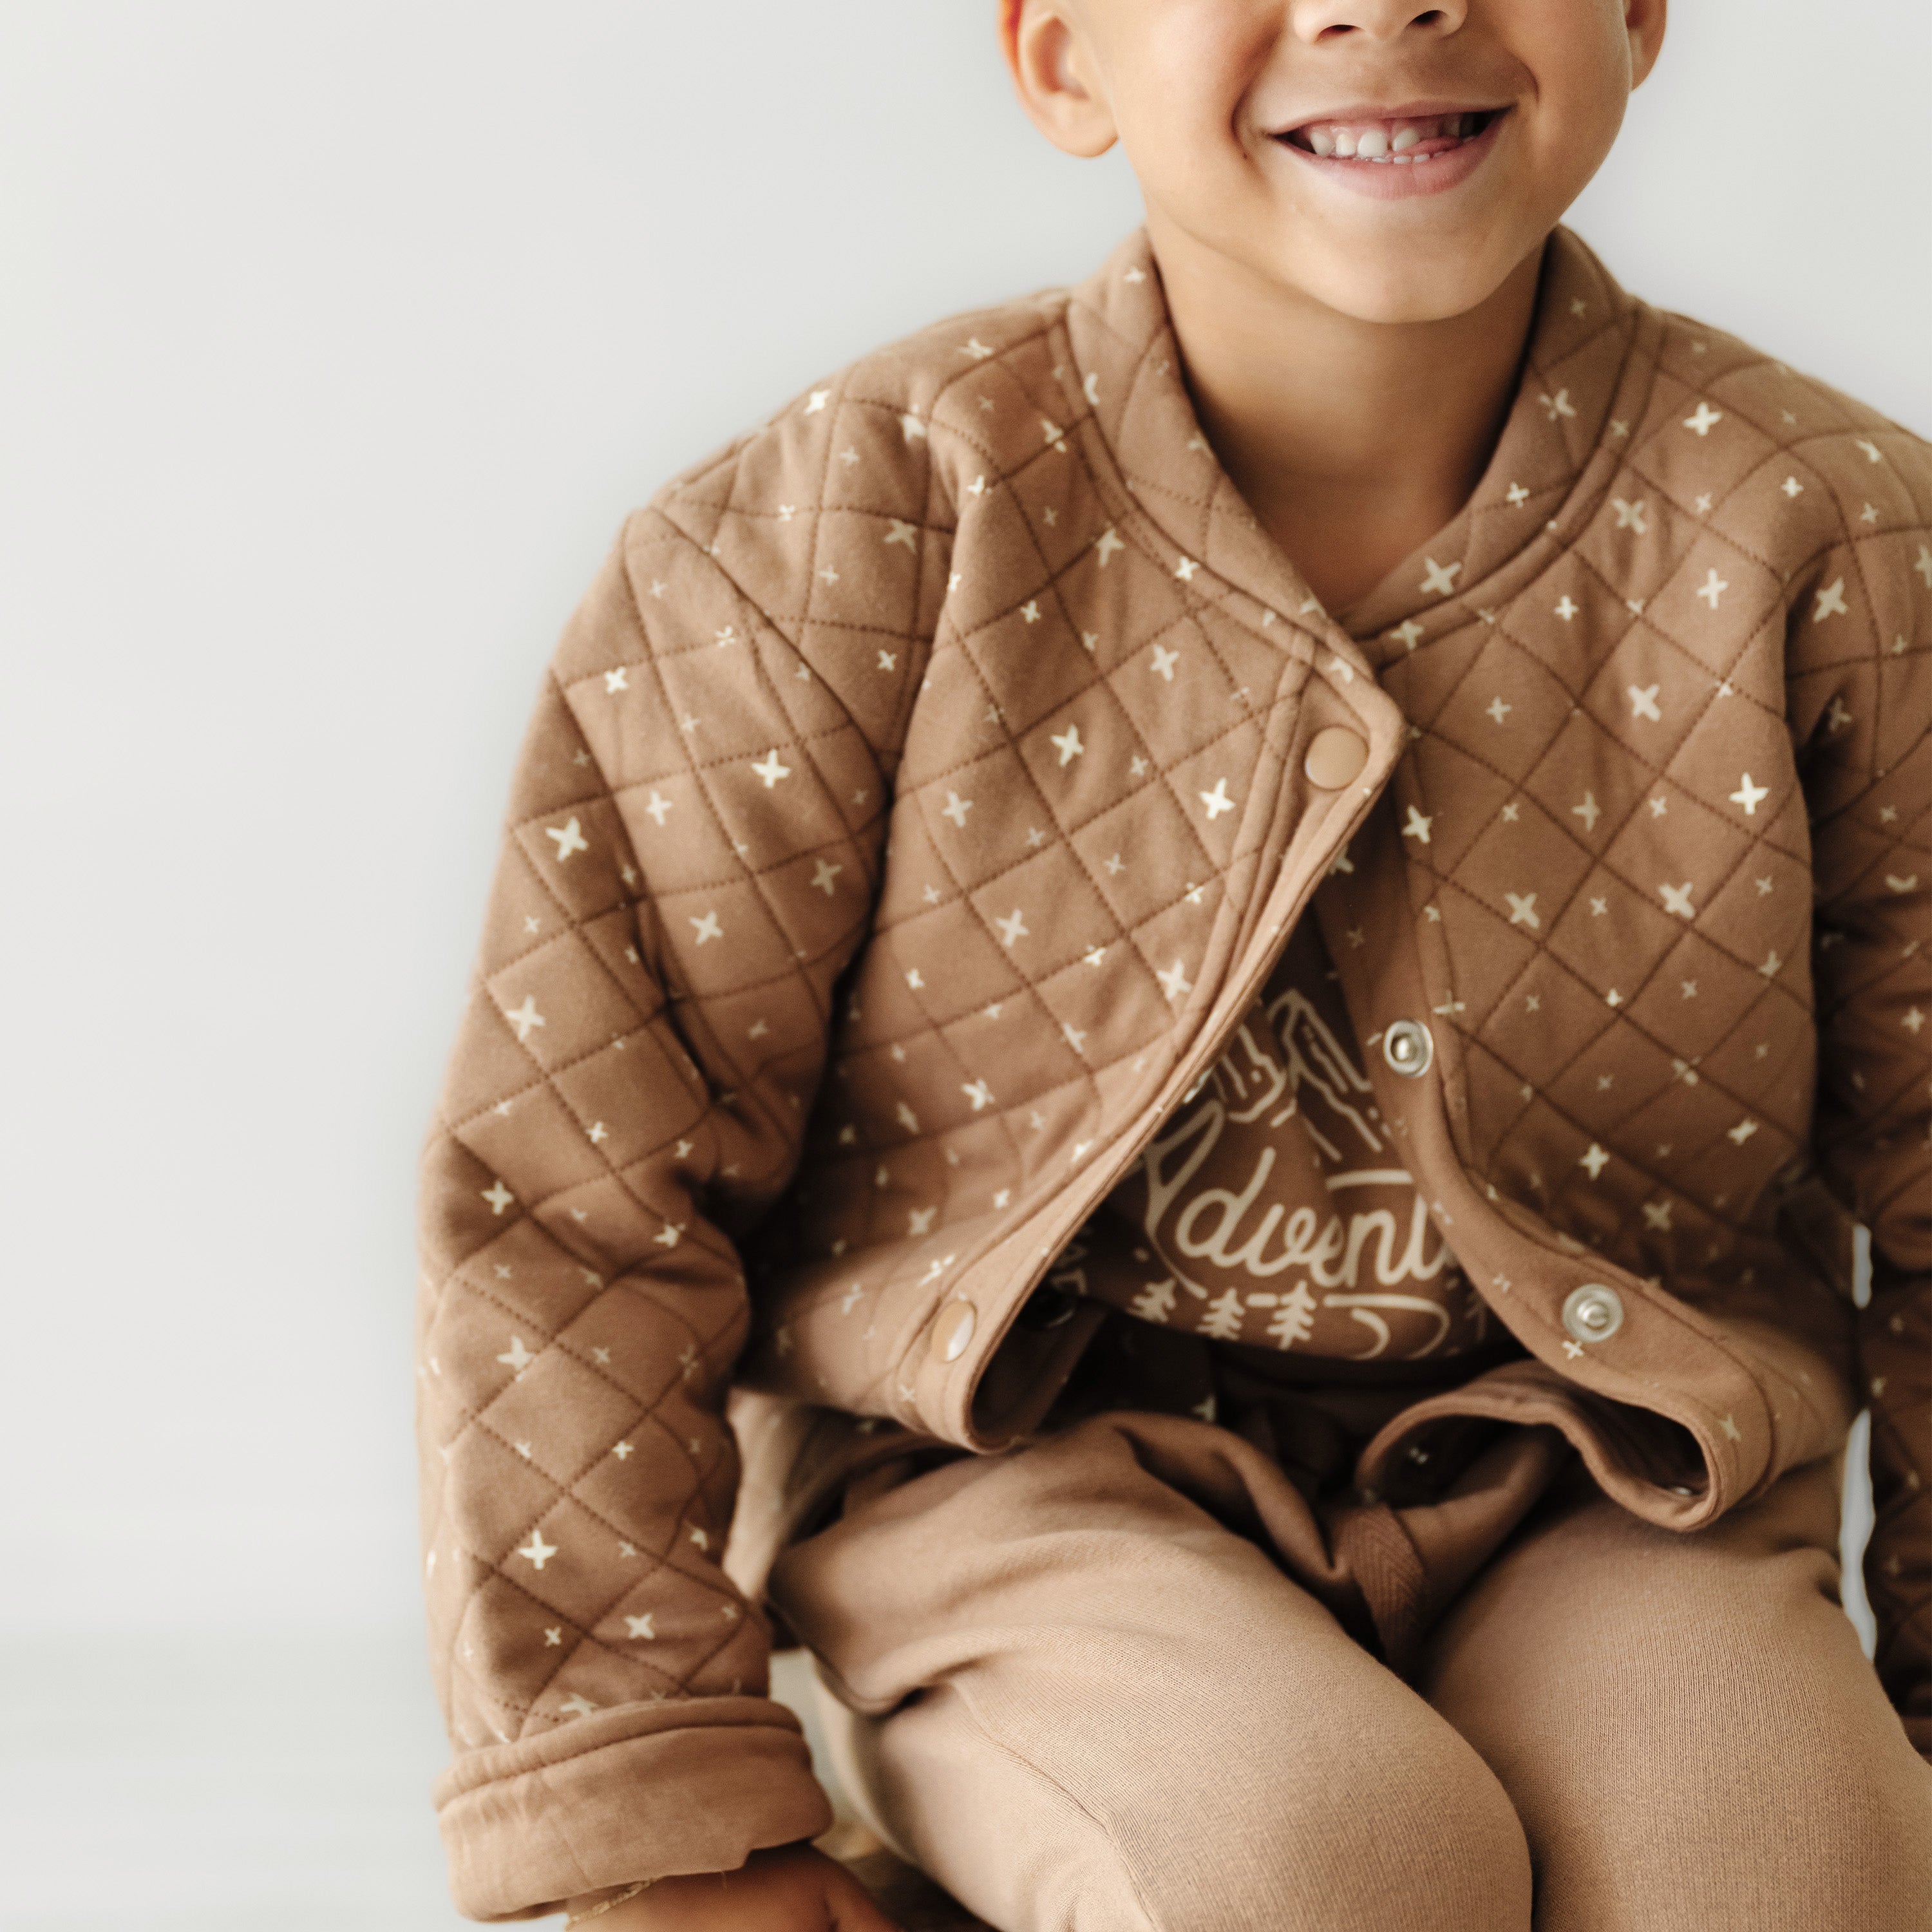 A young boy in a brown Organic Merino Wool Buttoned Jacket - Sparkle from Organic Kids, smiling joyfully against a light background. Only his upper body is visible, emphasizing his bright and cheerful demeanor